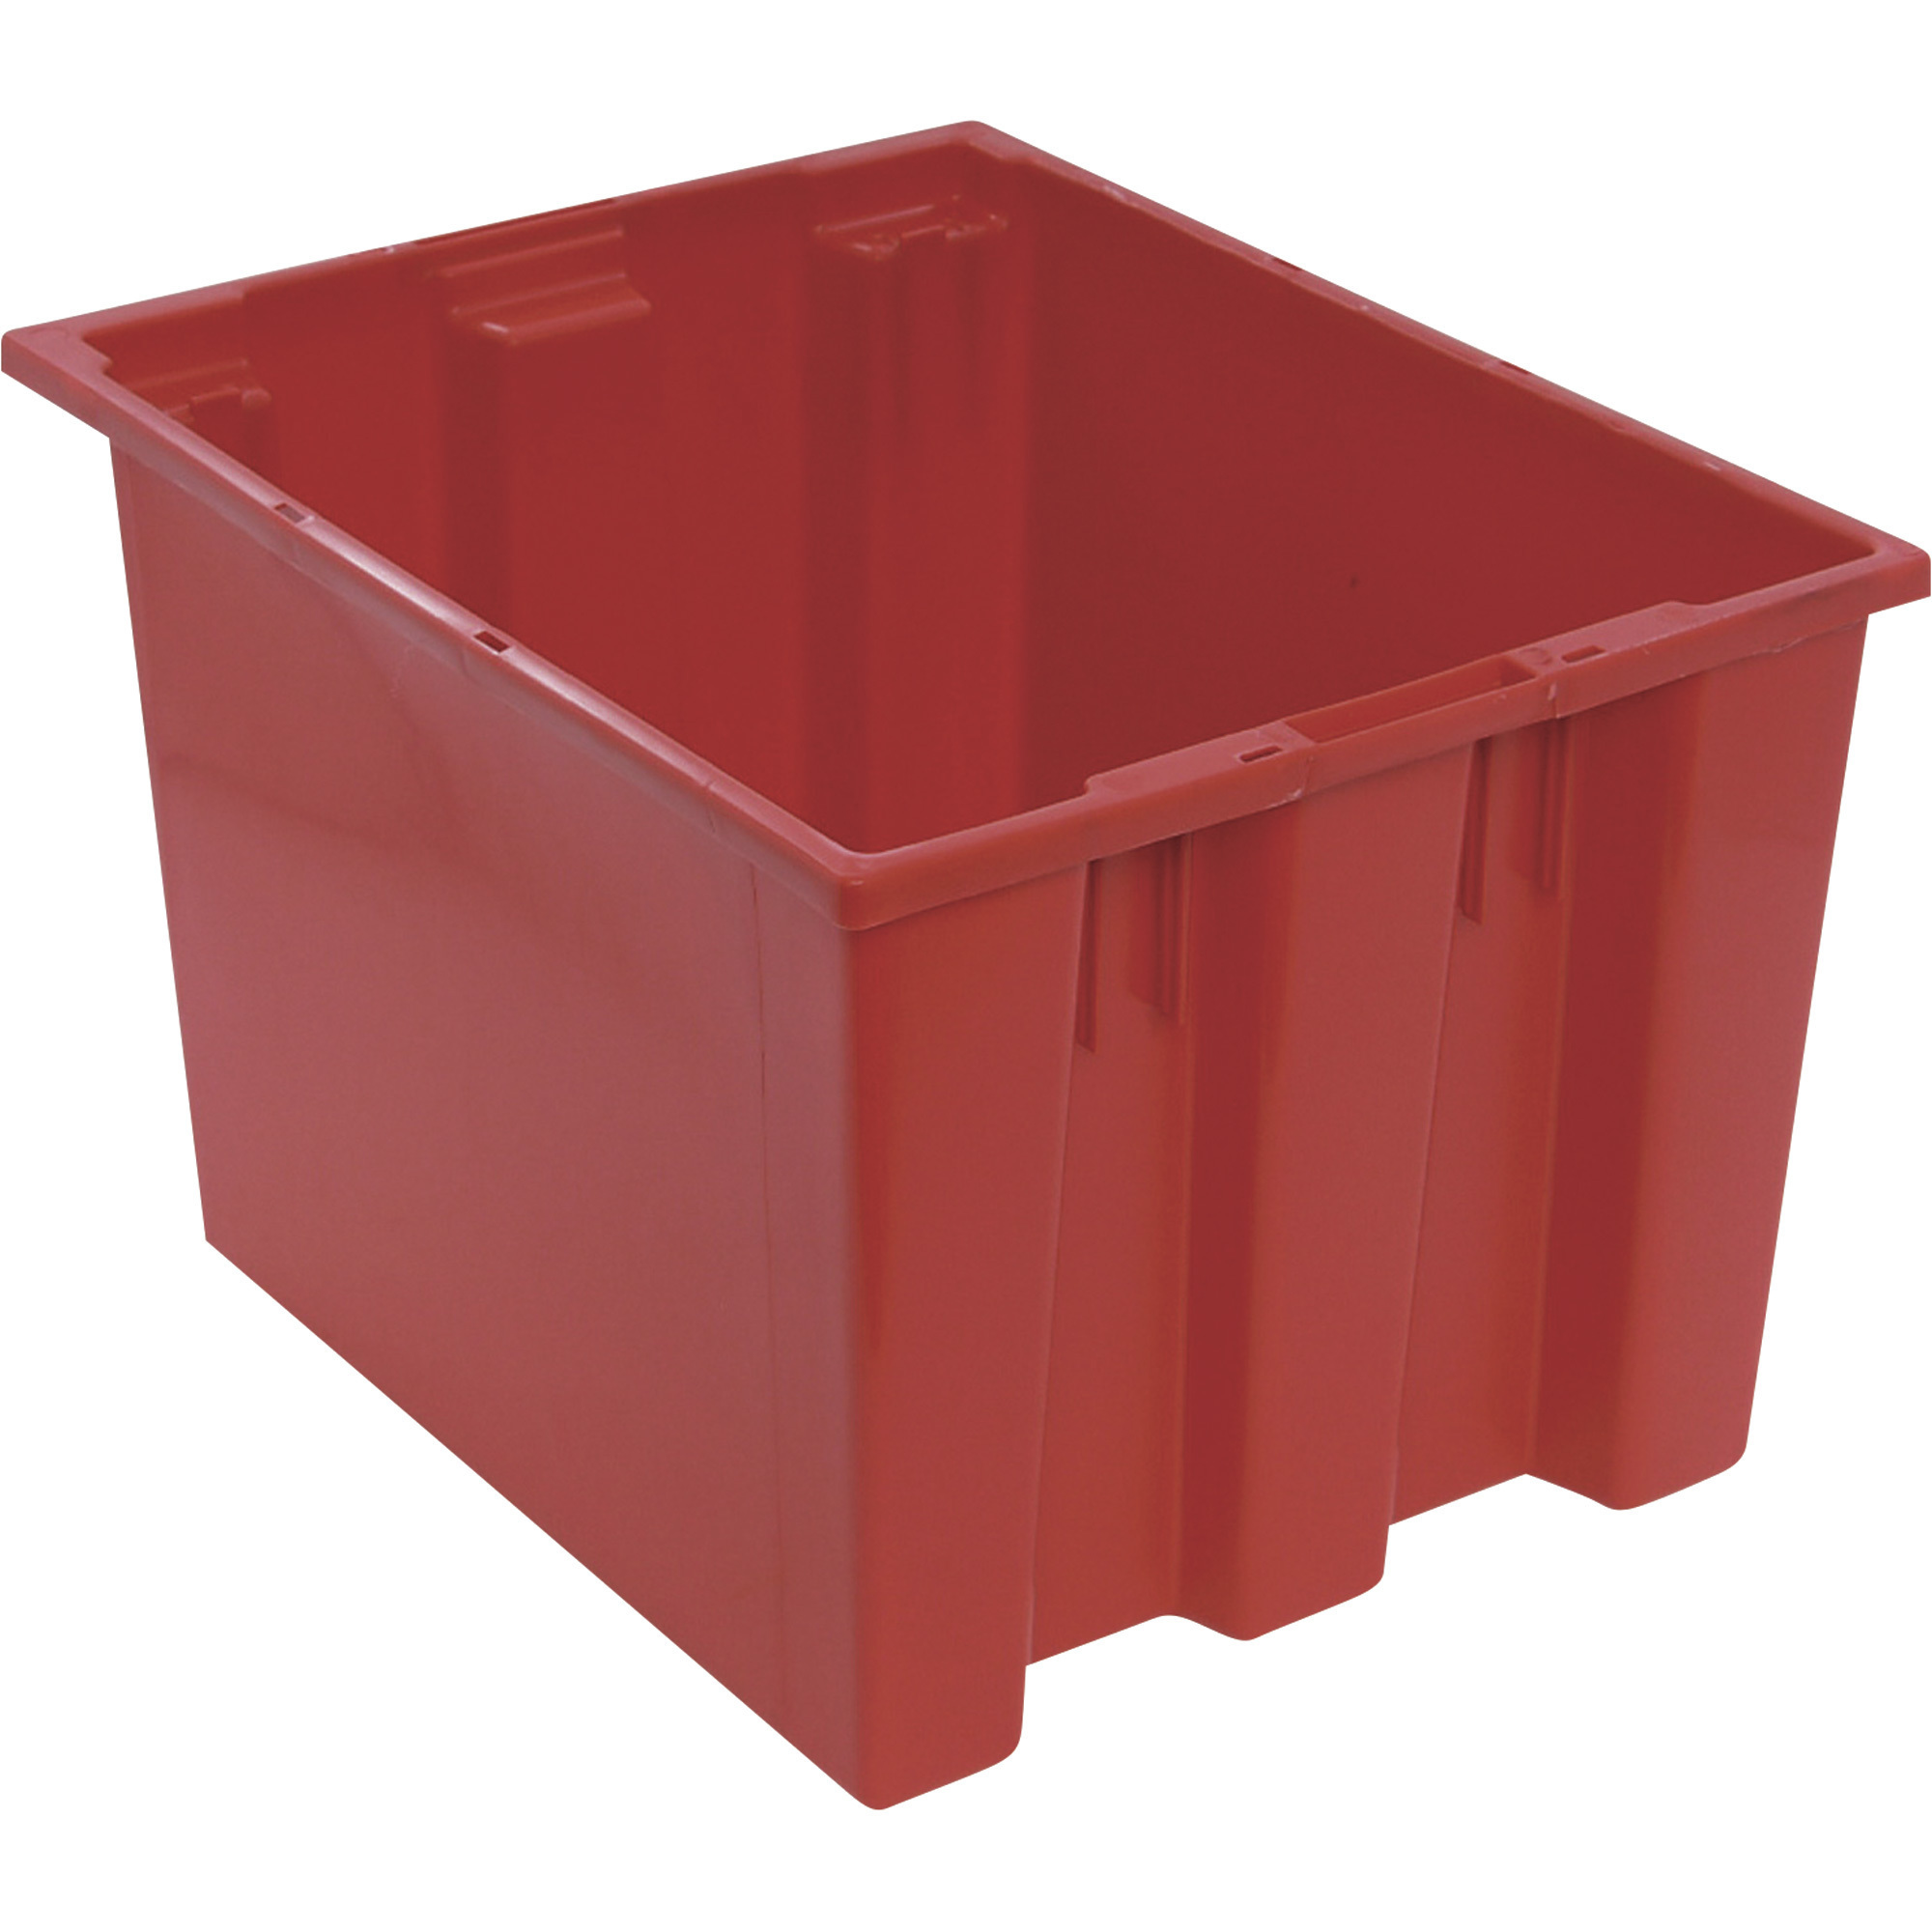 Quantum Storage Stack and Nest Tote Bin, 19 1/2Inch x 15 1/2Inch x 13Inch Size, Red, Carton of 6, Model SNT195RDCS